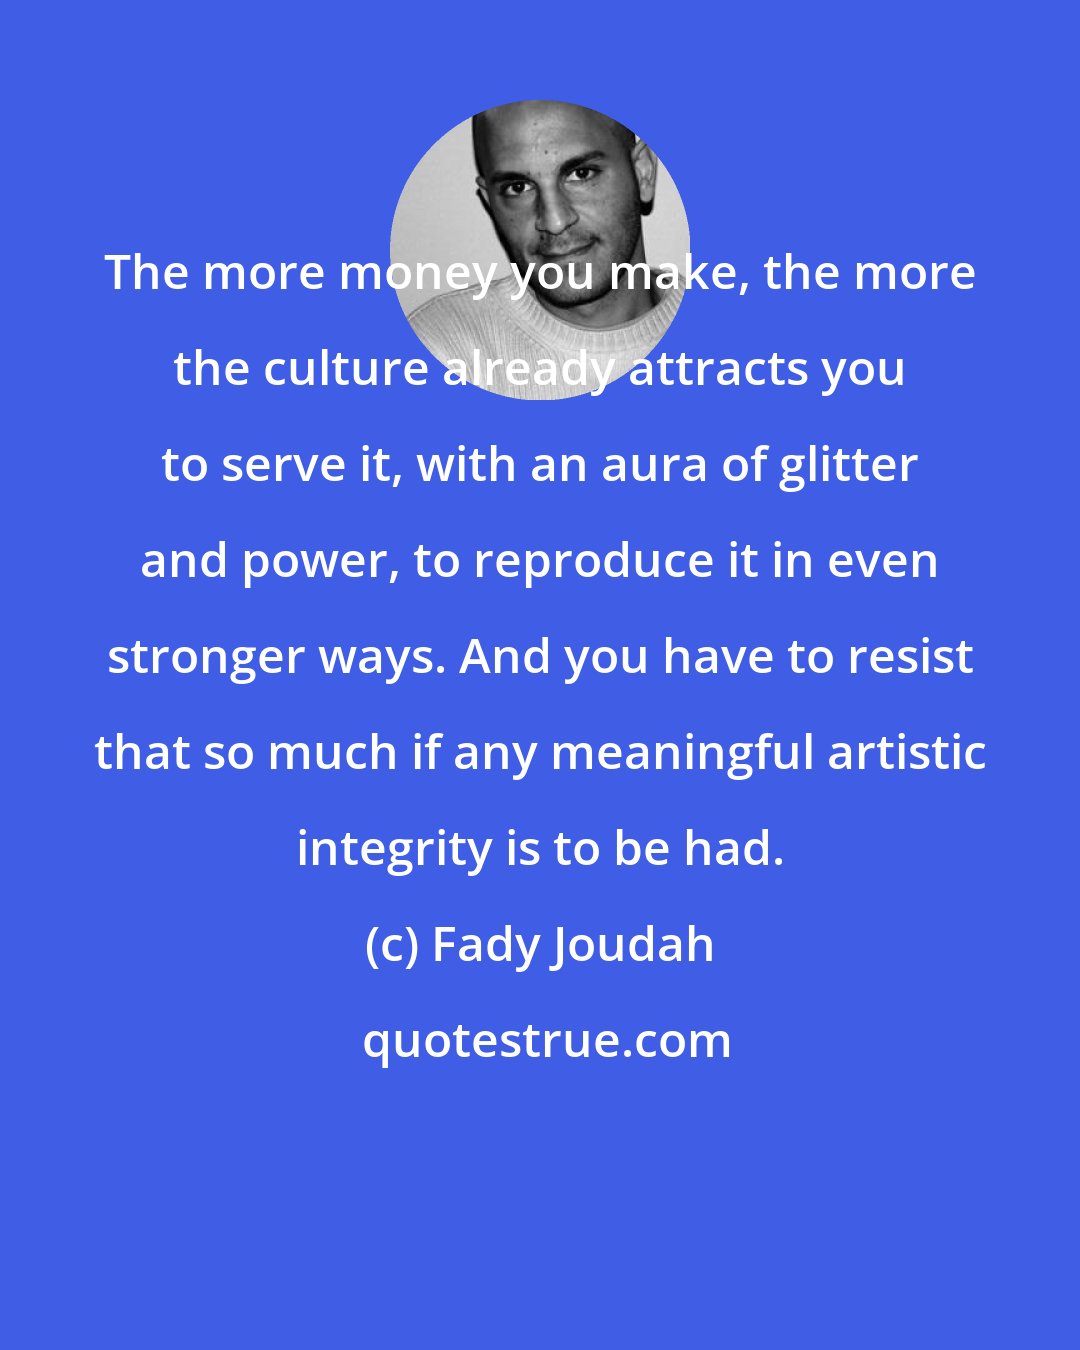 Fady Joudah: The more money you make, the more the culture already attracts you to serve it, with an aura of glitter and power, to reproduce it in even stronger ways. And you have to resist that so much if any meaningful artistic integrity is to be had.